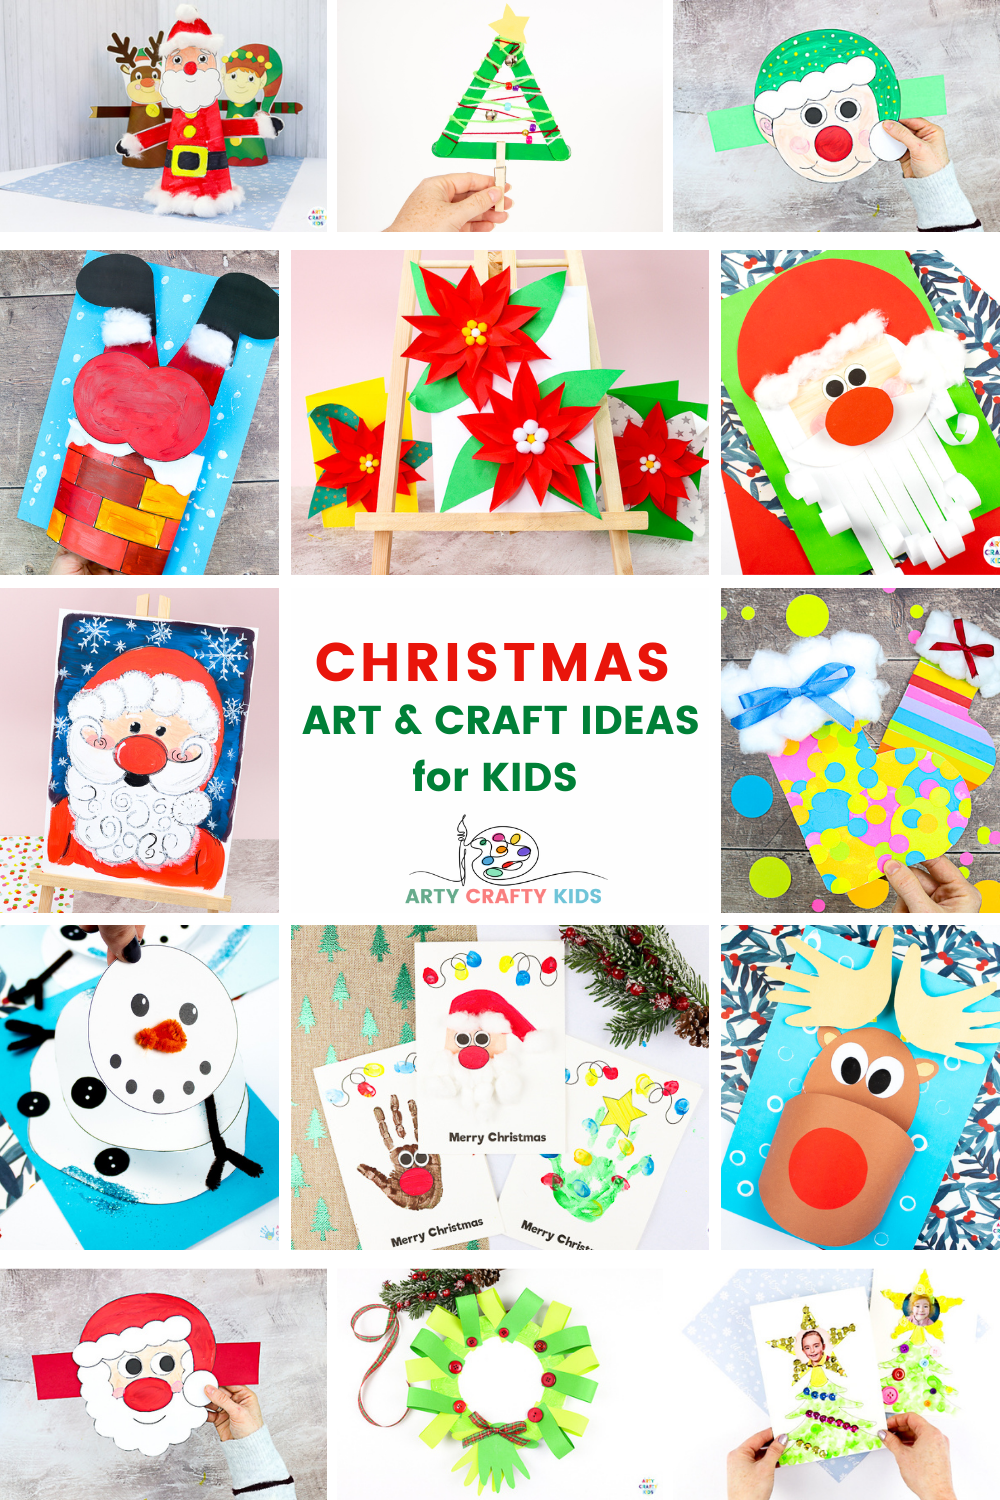 Art and Craft Christmas Ideas for Kids to try at home or in the classroom